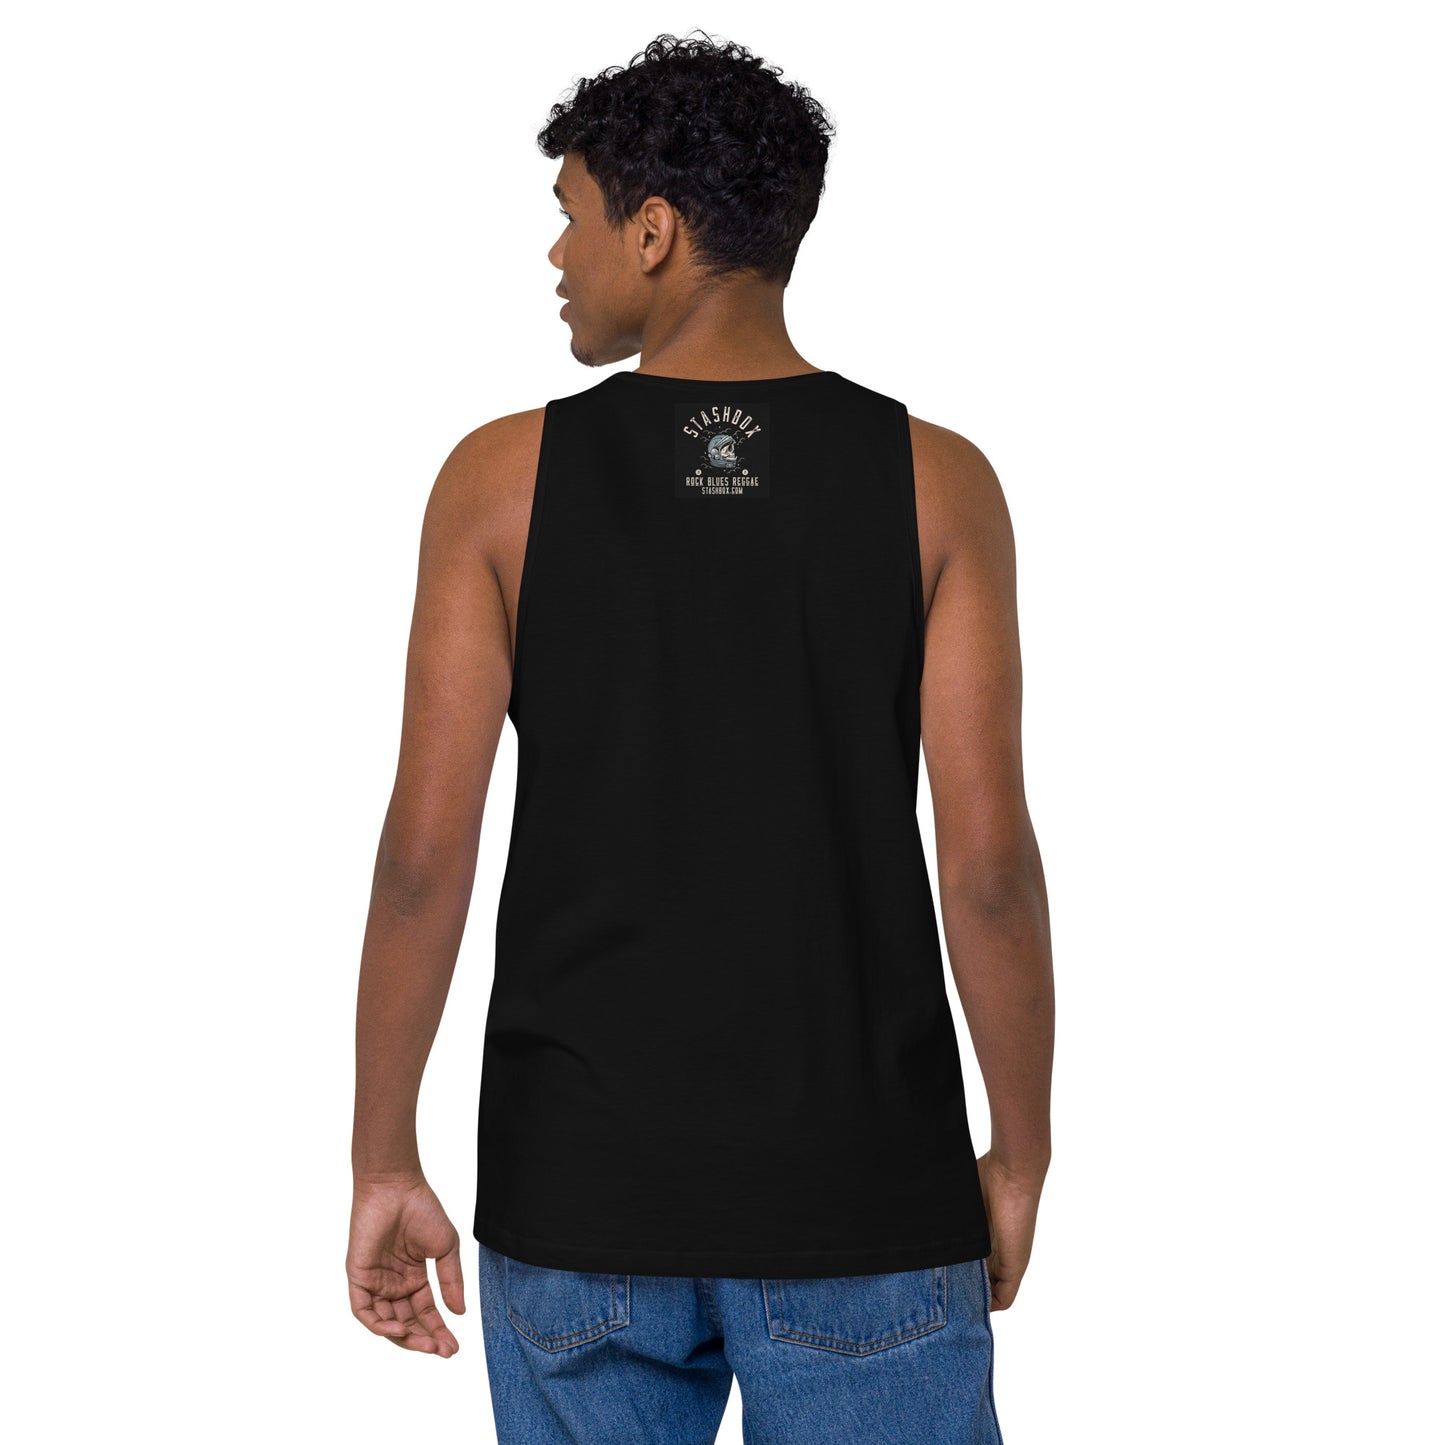 back - stashbox logo on Black Tank Top Dive into musical vibes with our Ocean Jam Men’s Premium Tank Top, Design #017. Your fashion, your gateway to musical expression, exclusively at Stashbox.ai.